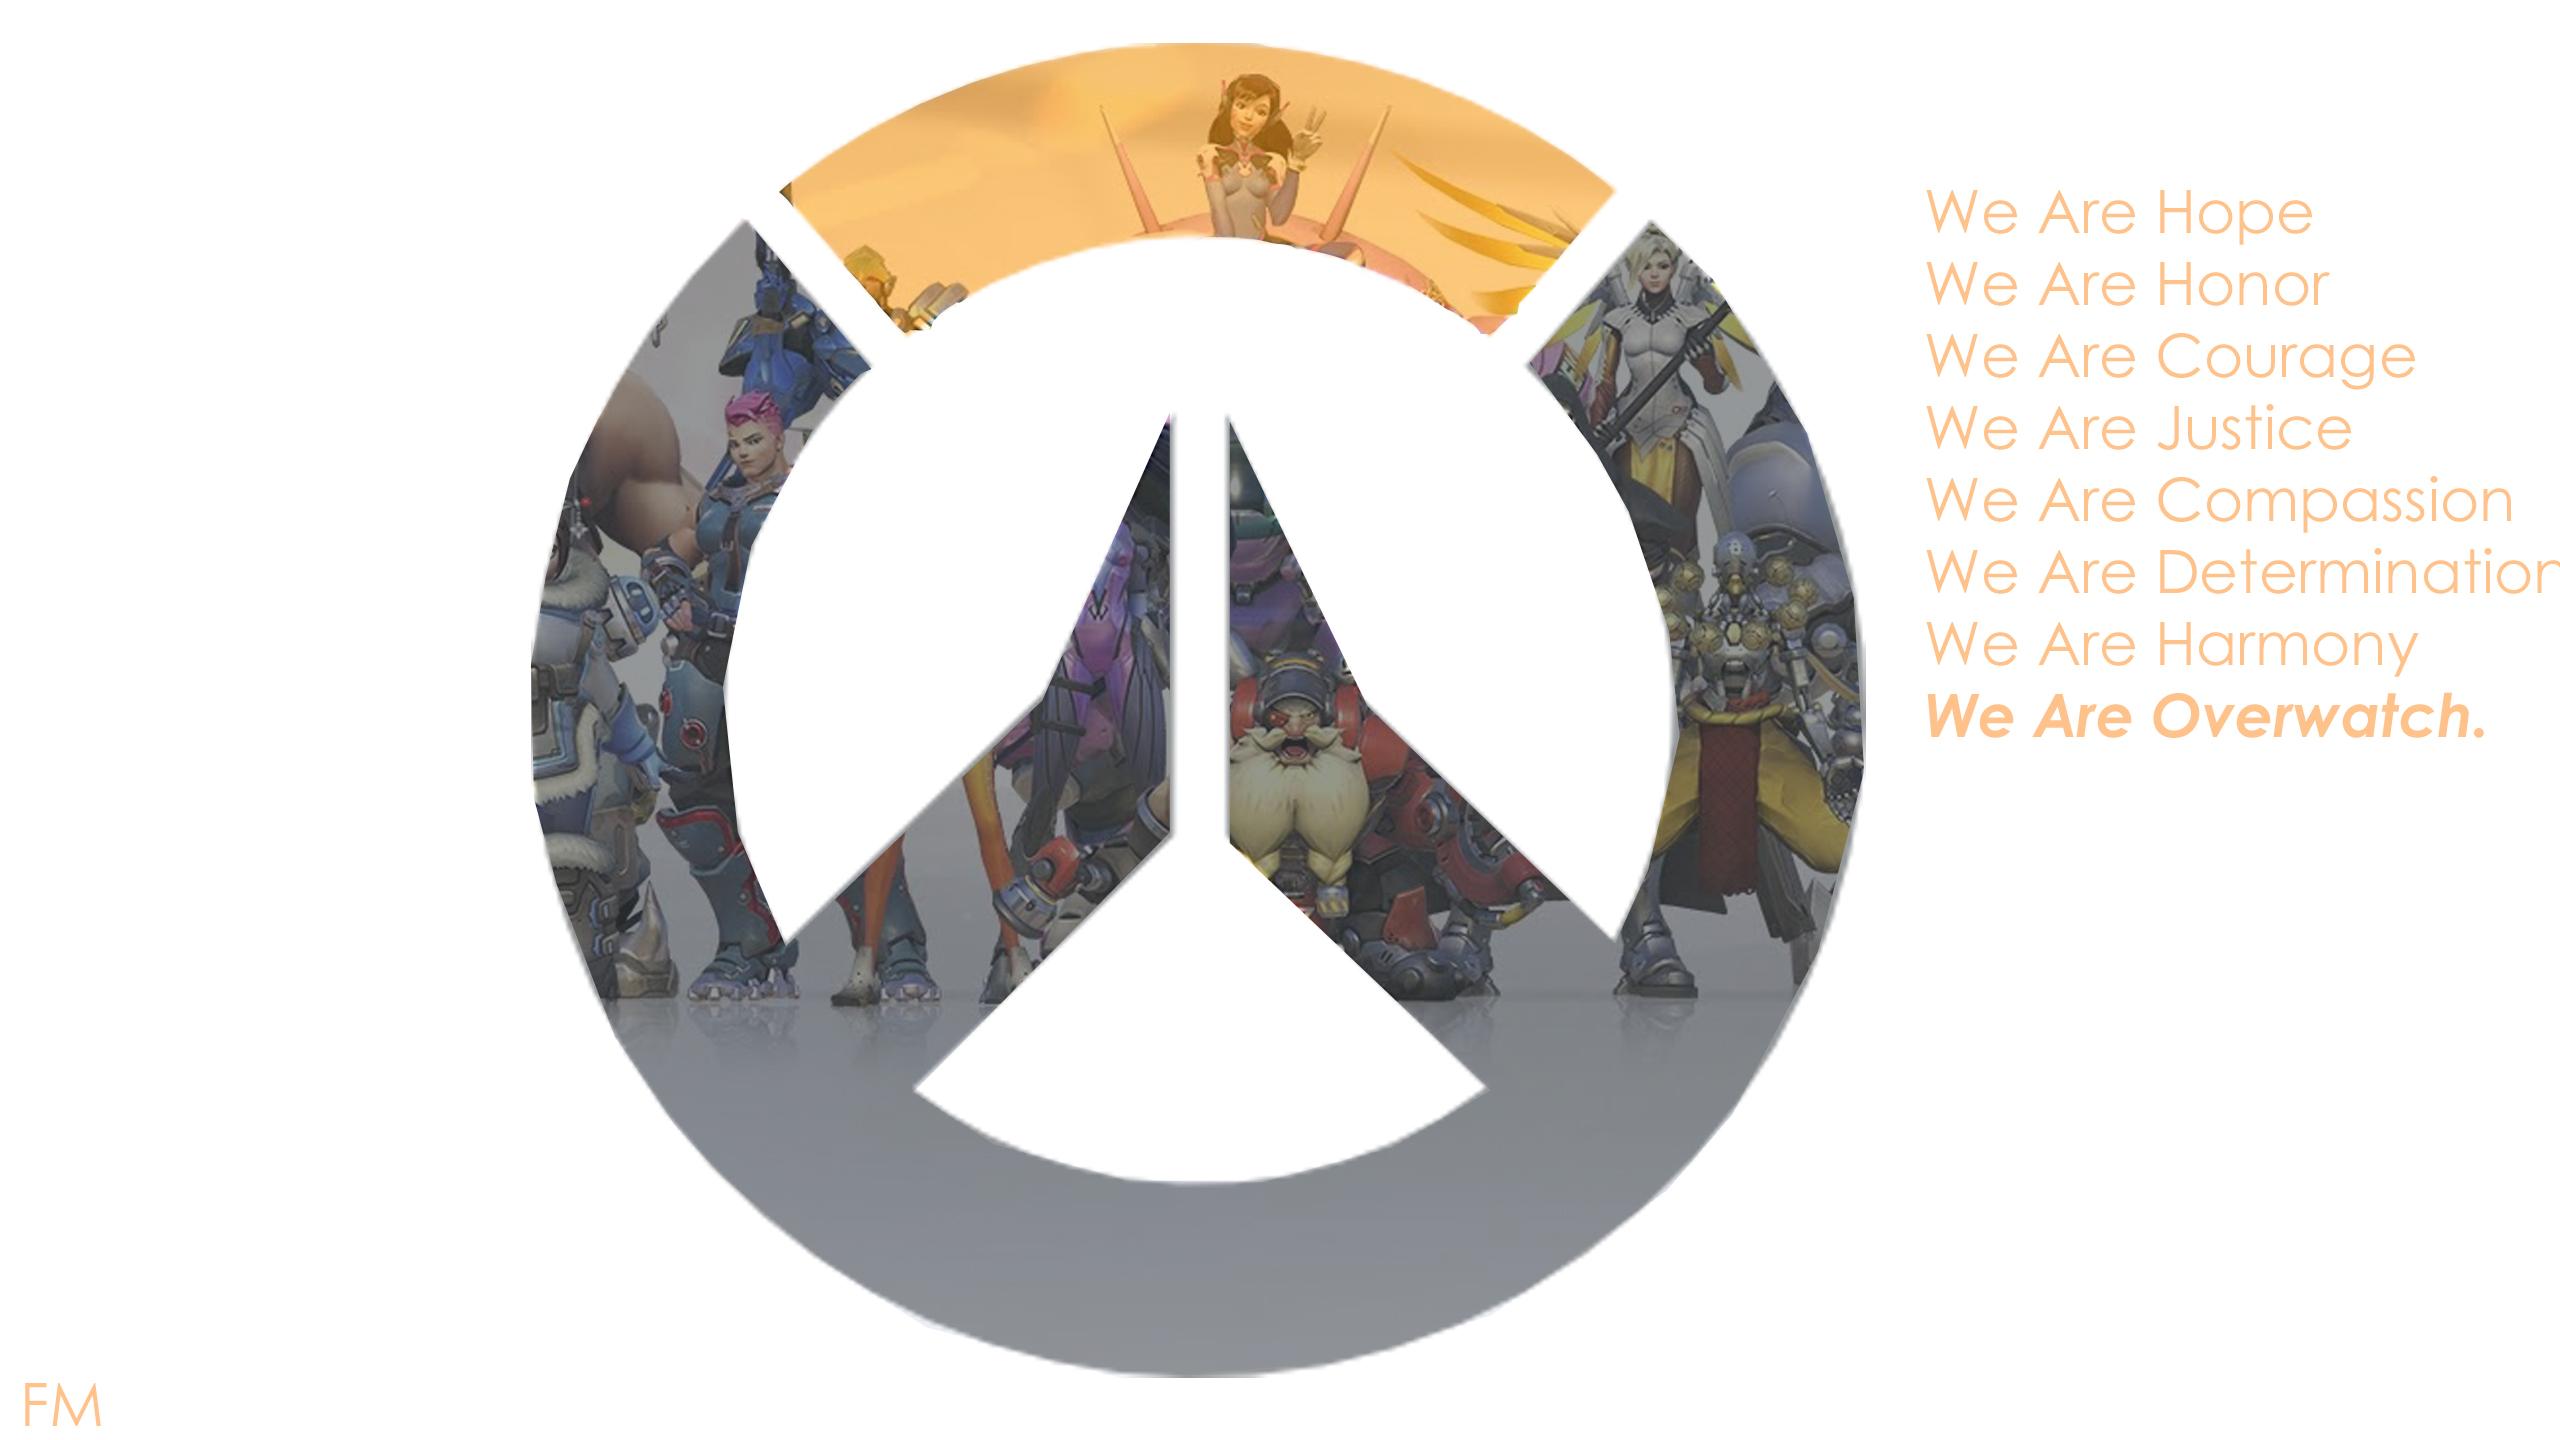 Overwatch Wallpaper, Picture, Image